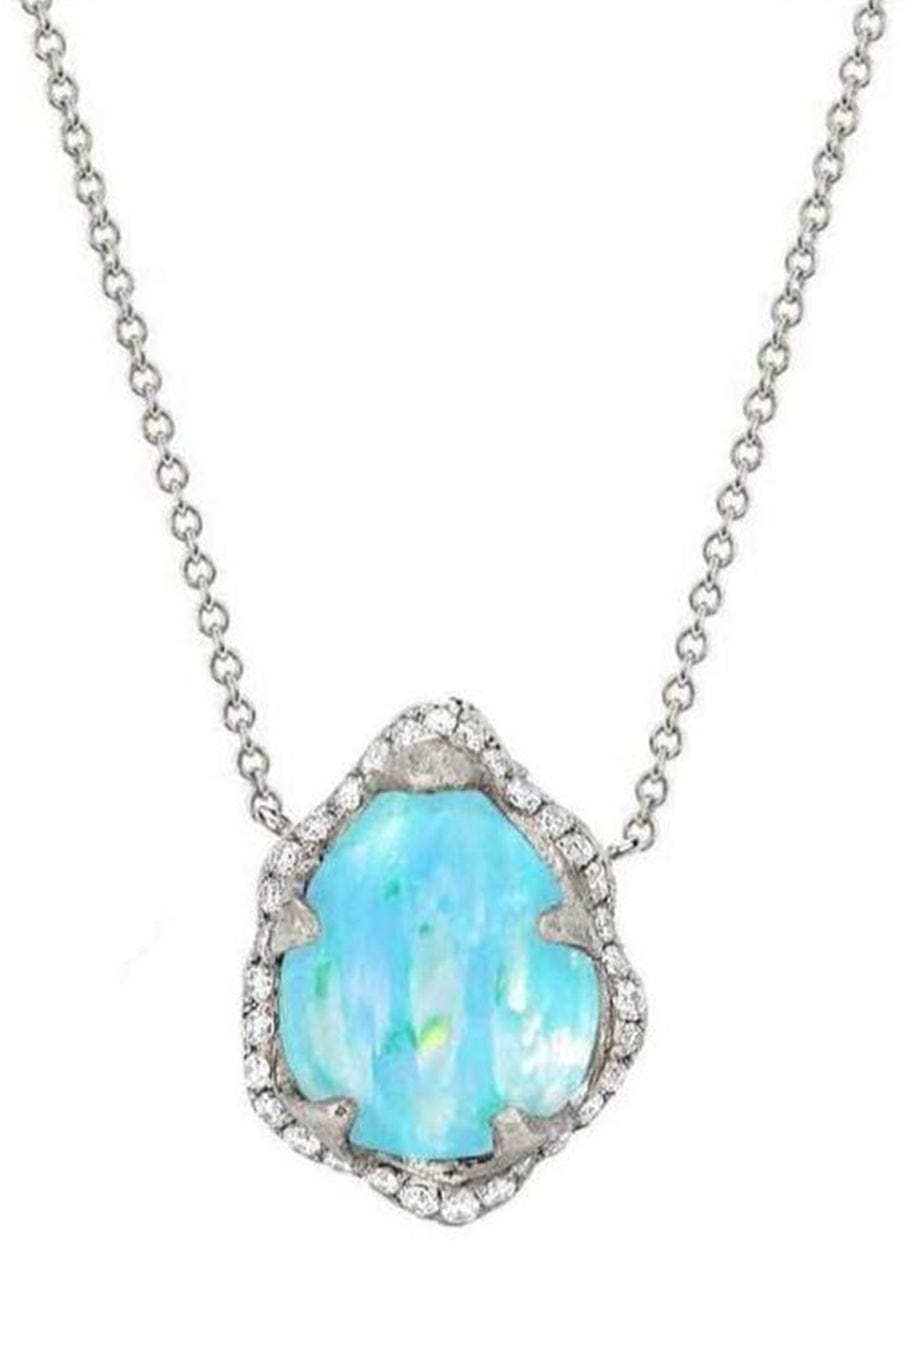 LOGAN HOLLOWELL-Baby Queen Water Drop Blue Opal Necklace with Full Pavé Diamond Halo-